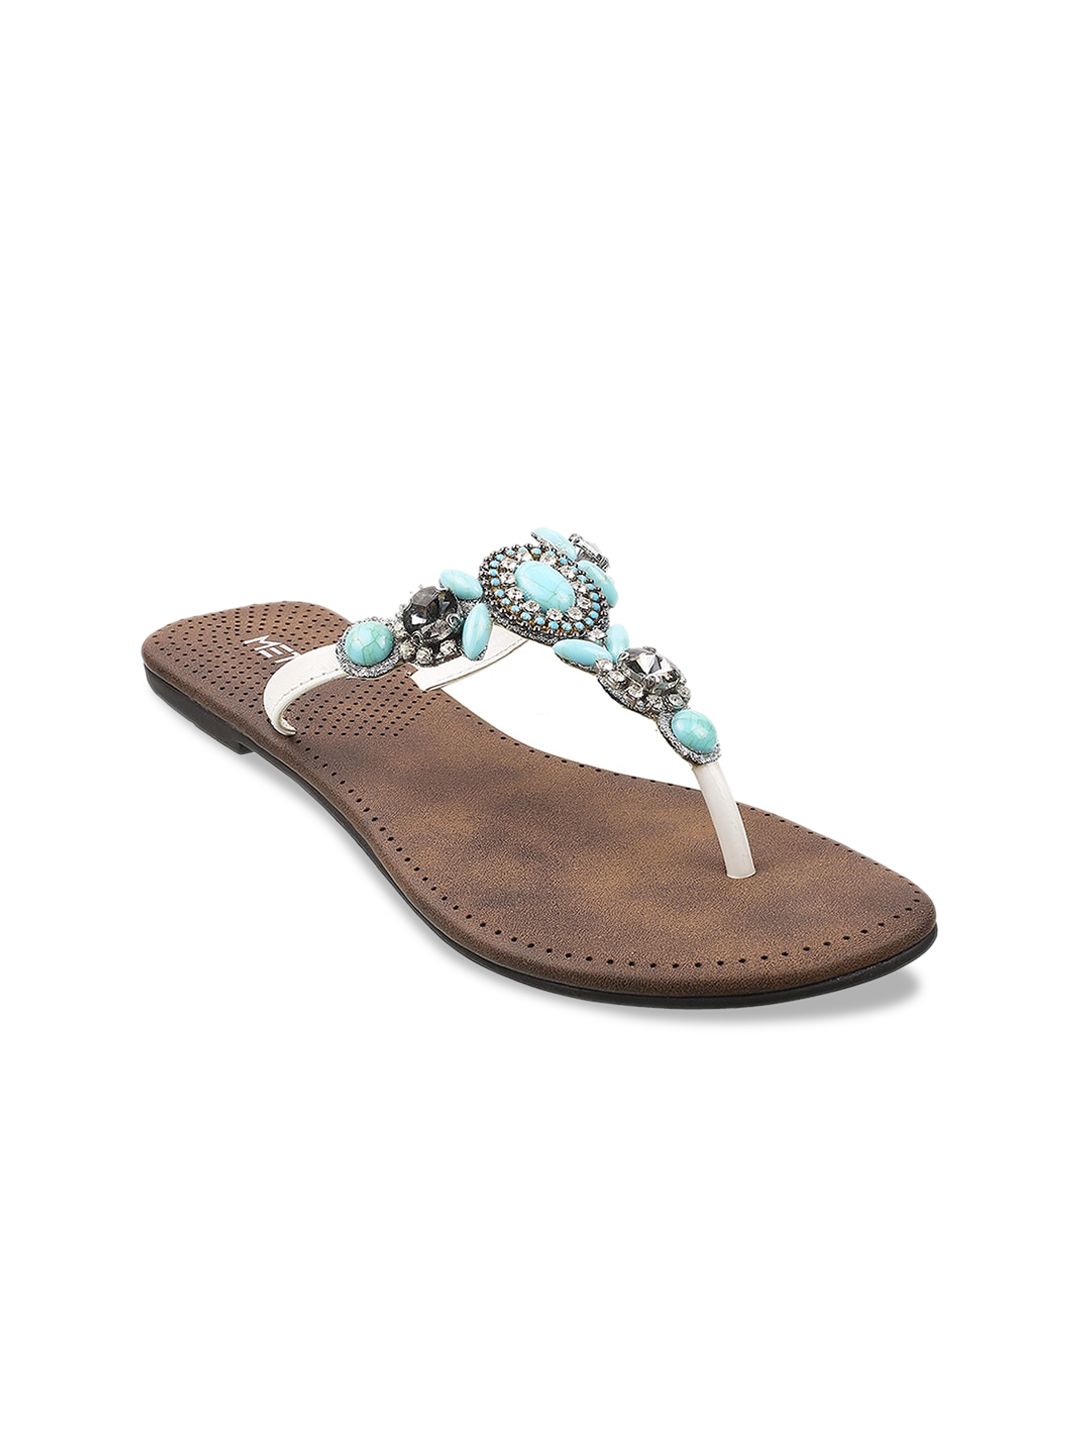 Metro Women White Embellished T-Strap Flats Price in India